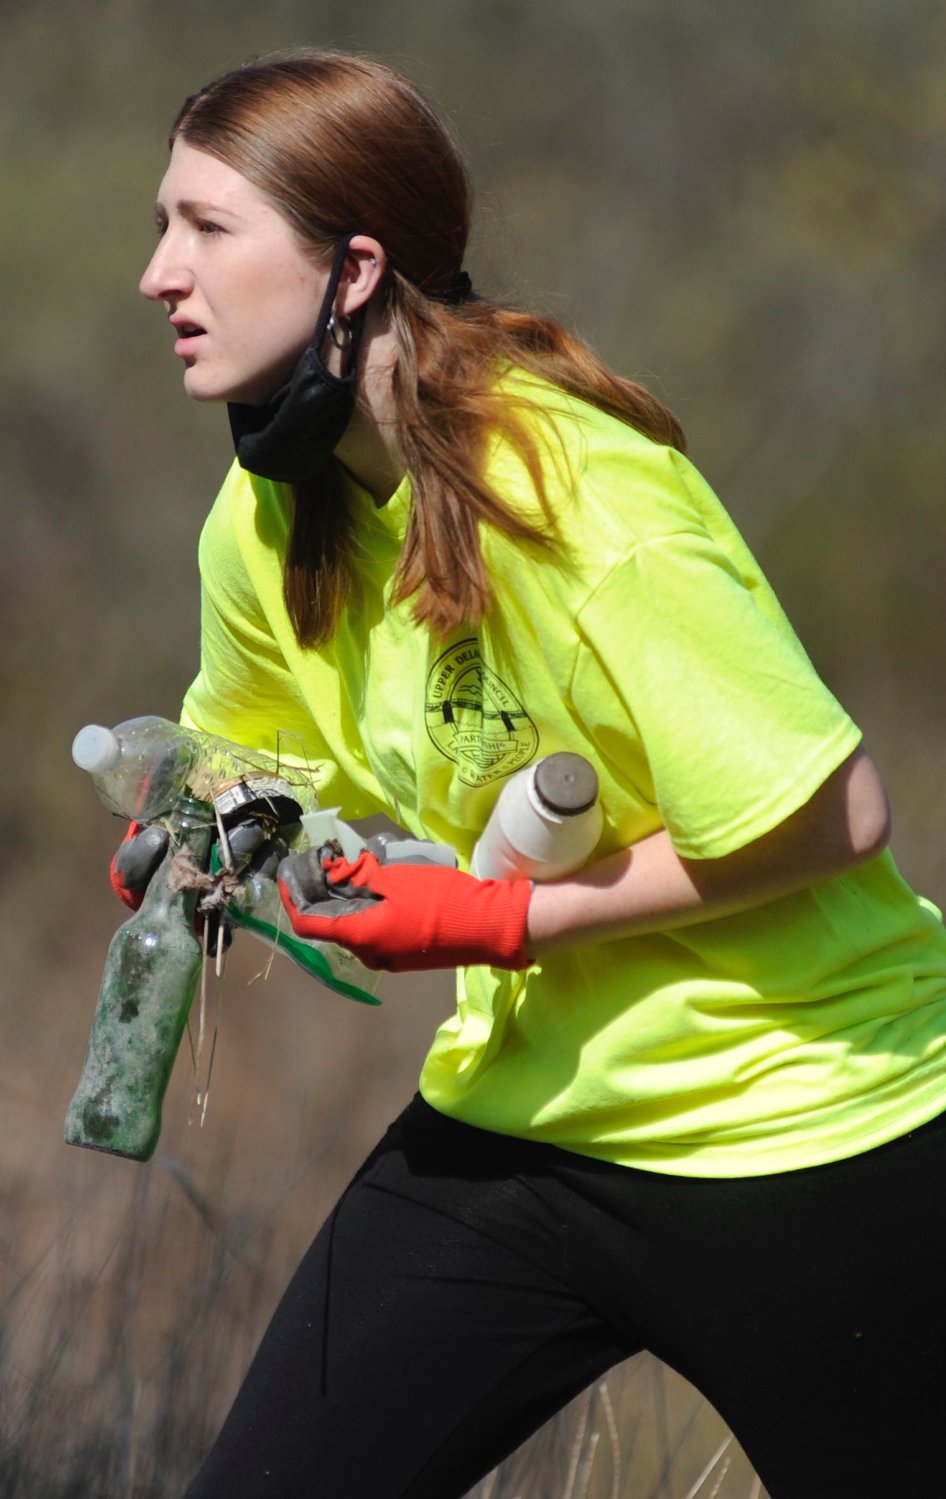 Sullivan West student Sofia Seidl was part of the crew picking up trash at the Basket Creek fishing access. When Seidl was close to others, she was masked...